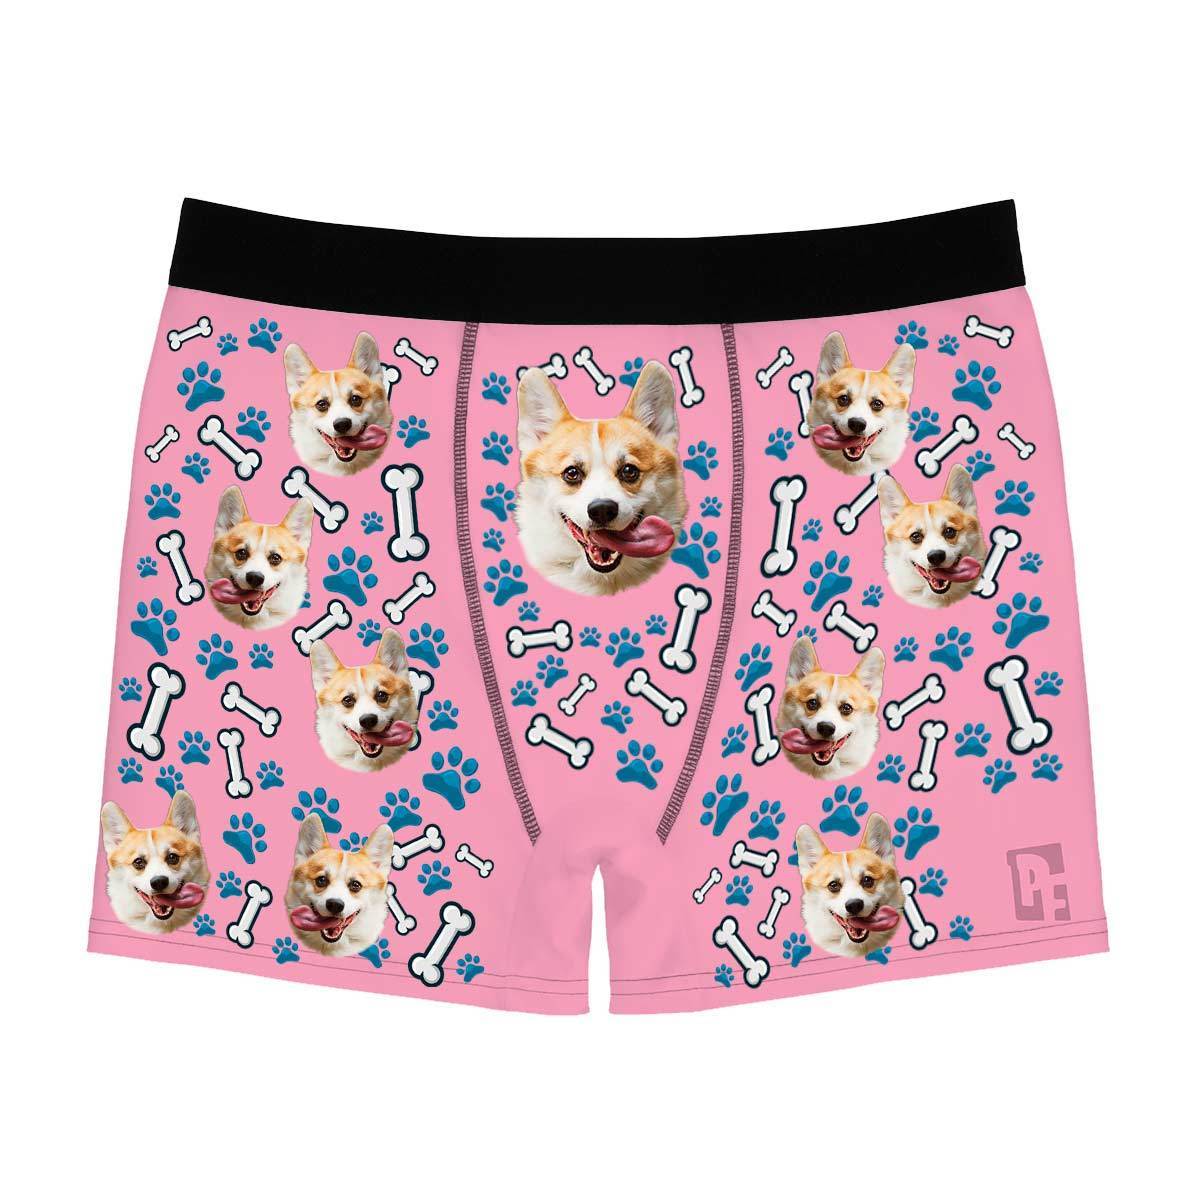 Pink Dog men's boxer briefs personalized with photo printed on them